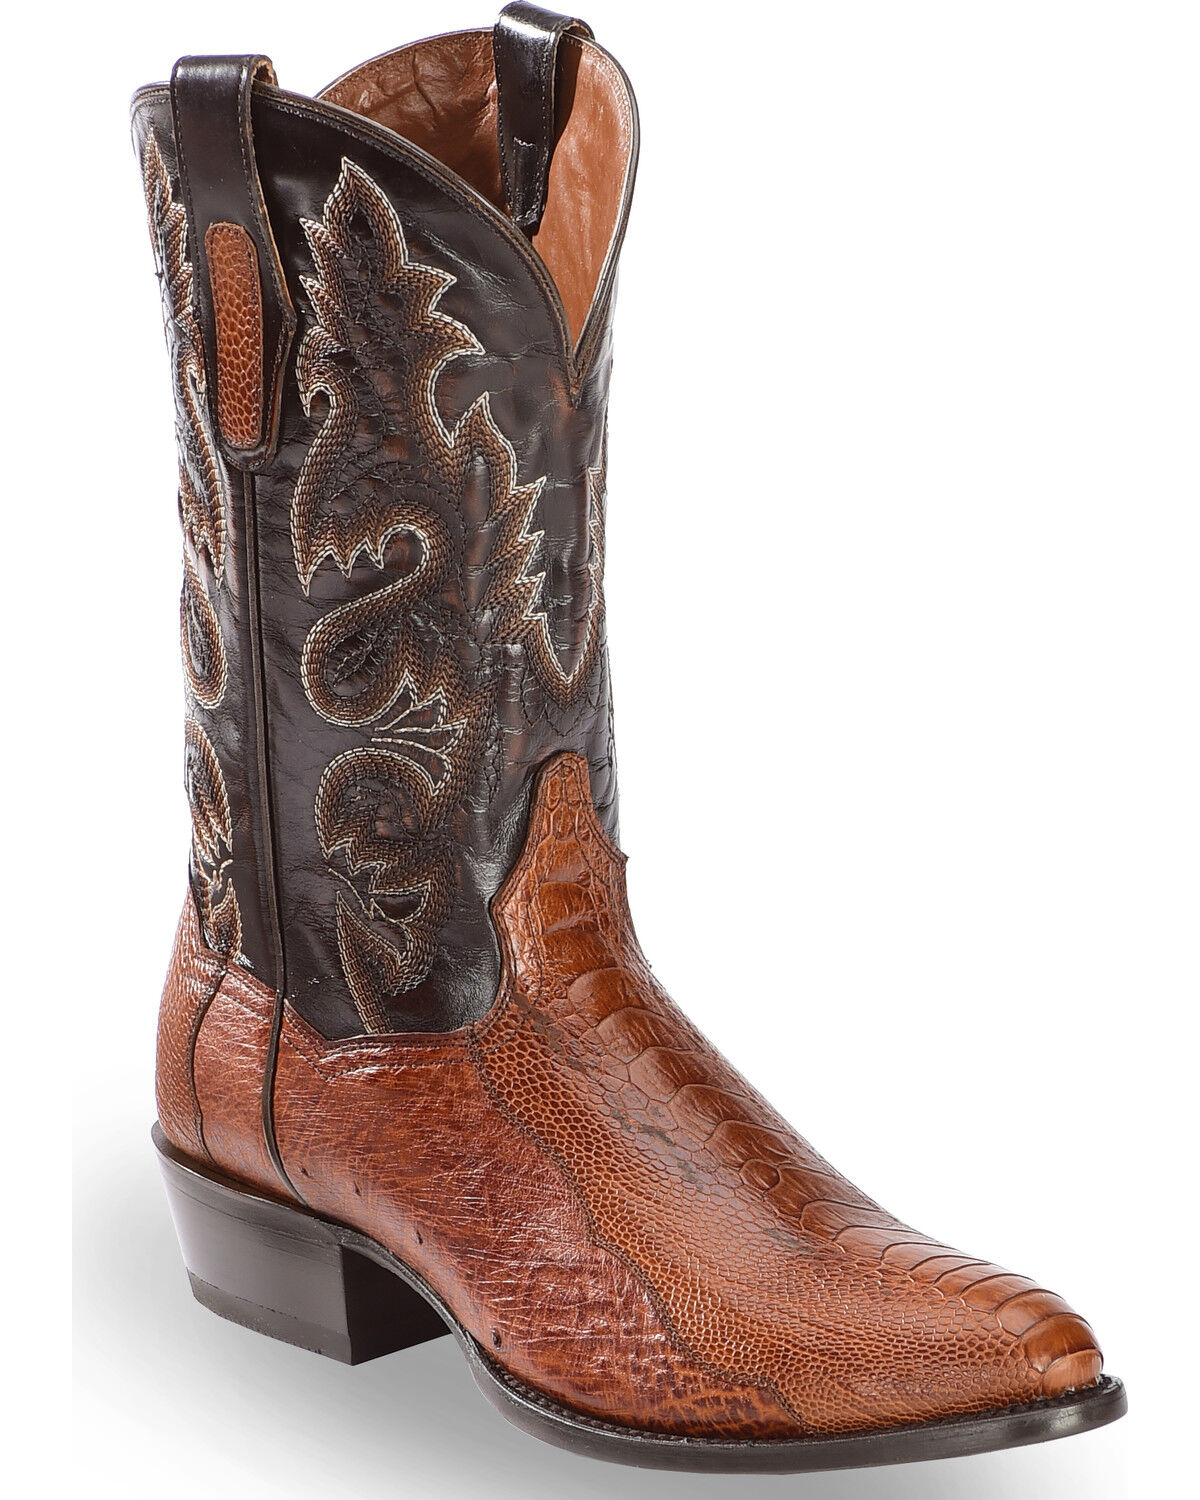 Men's Smooth Quill Ostrich Boots - Sheplers